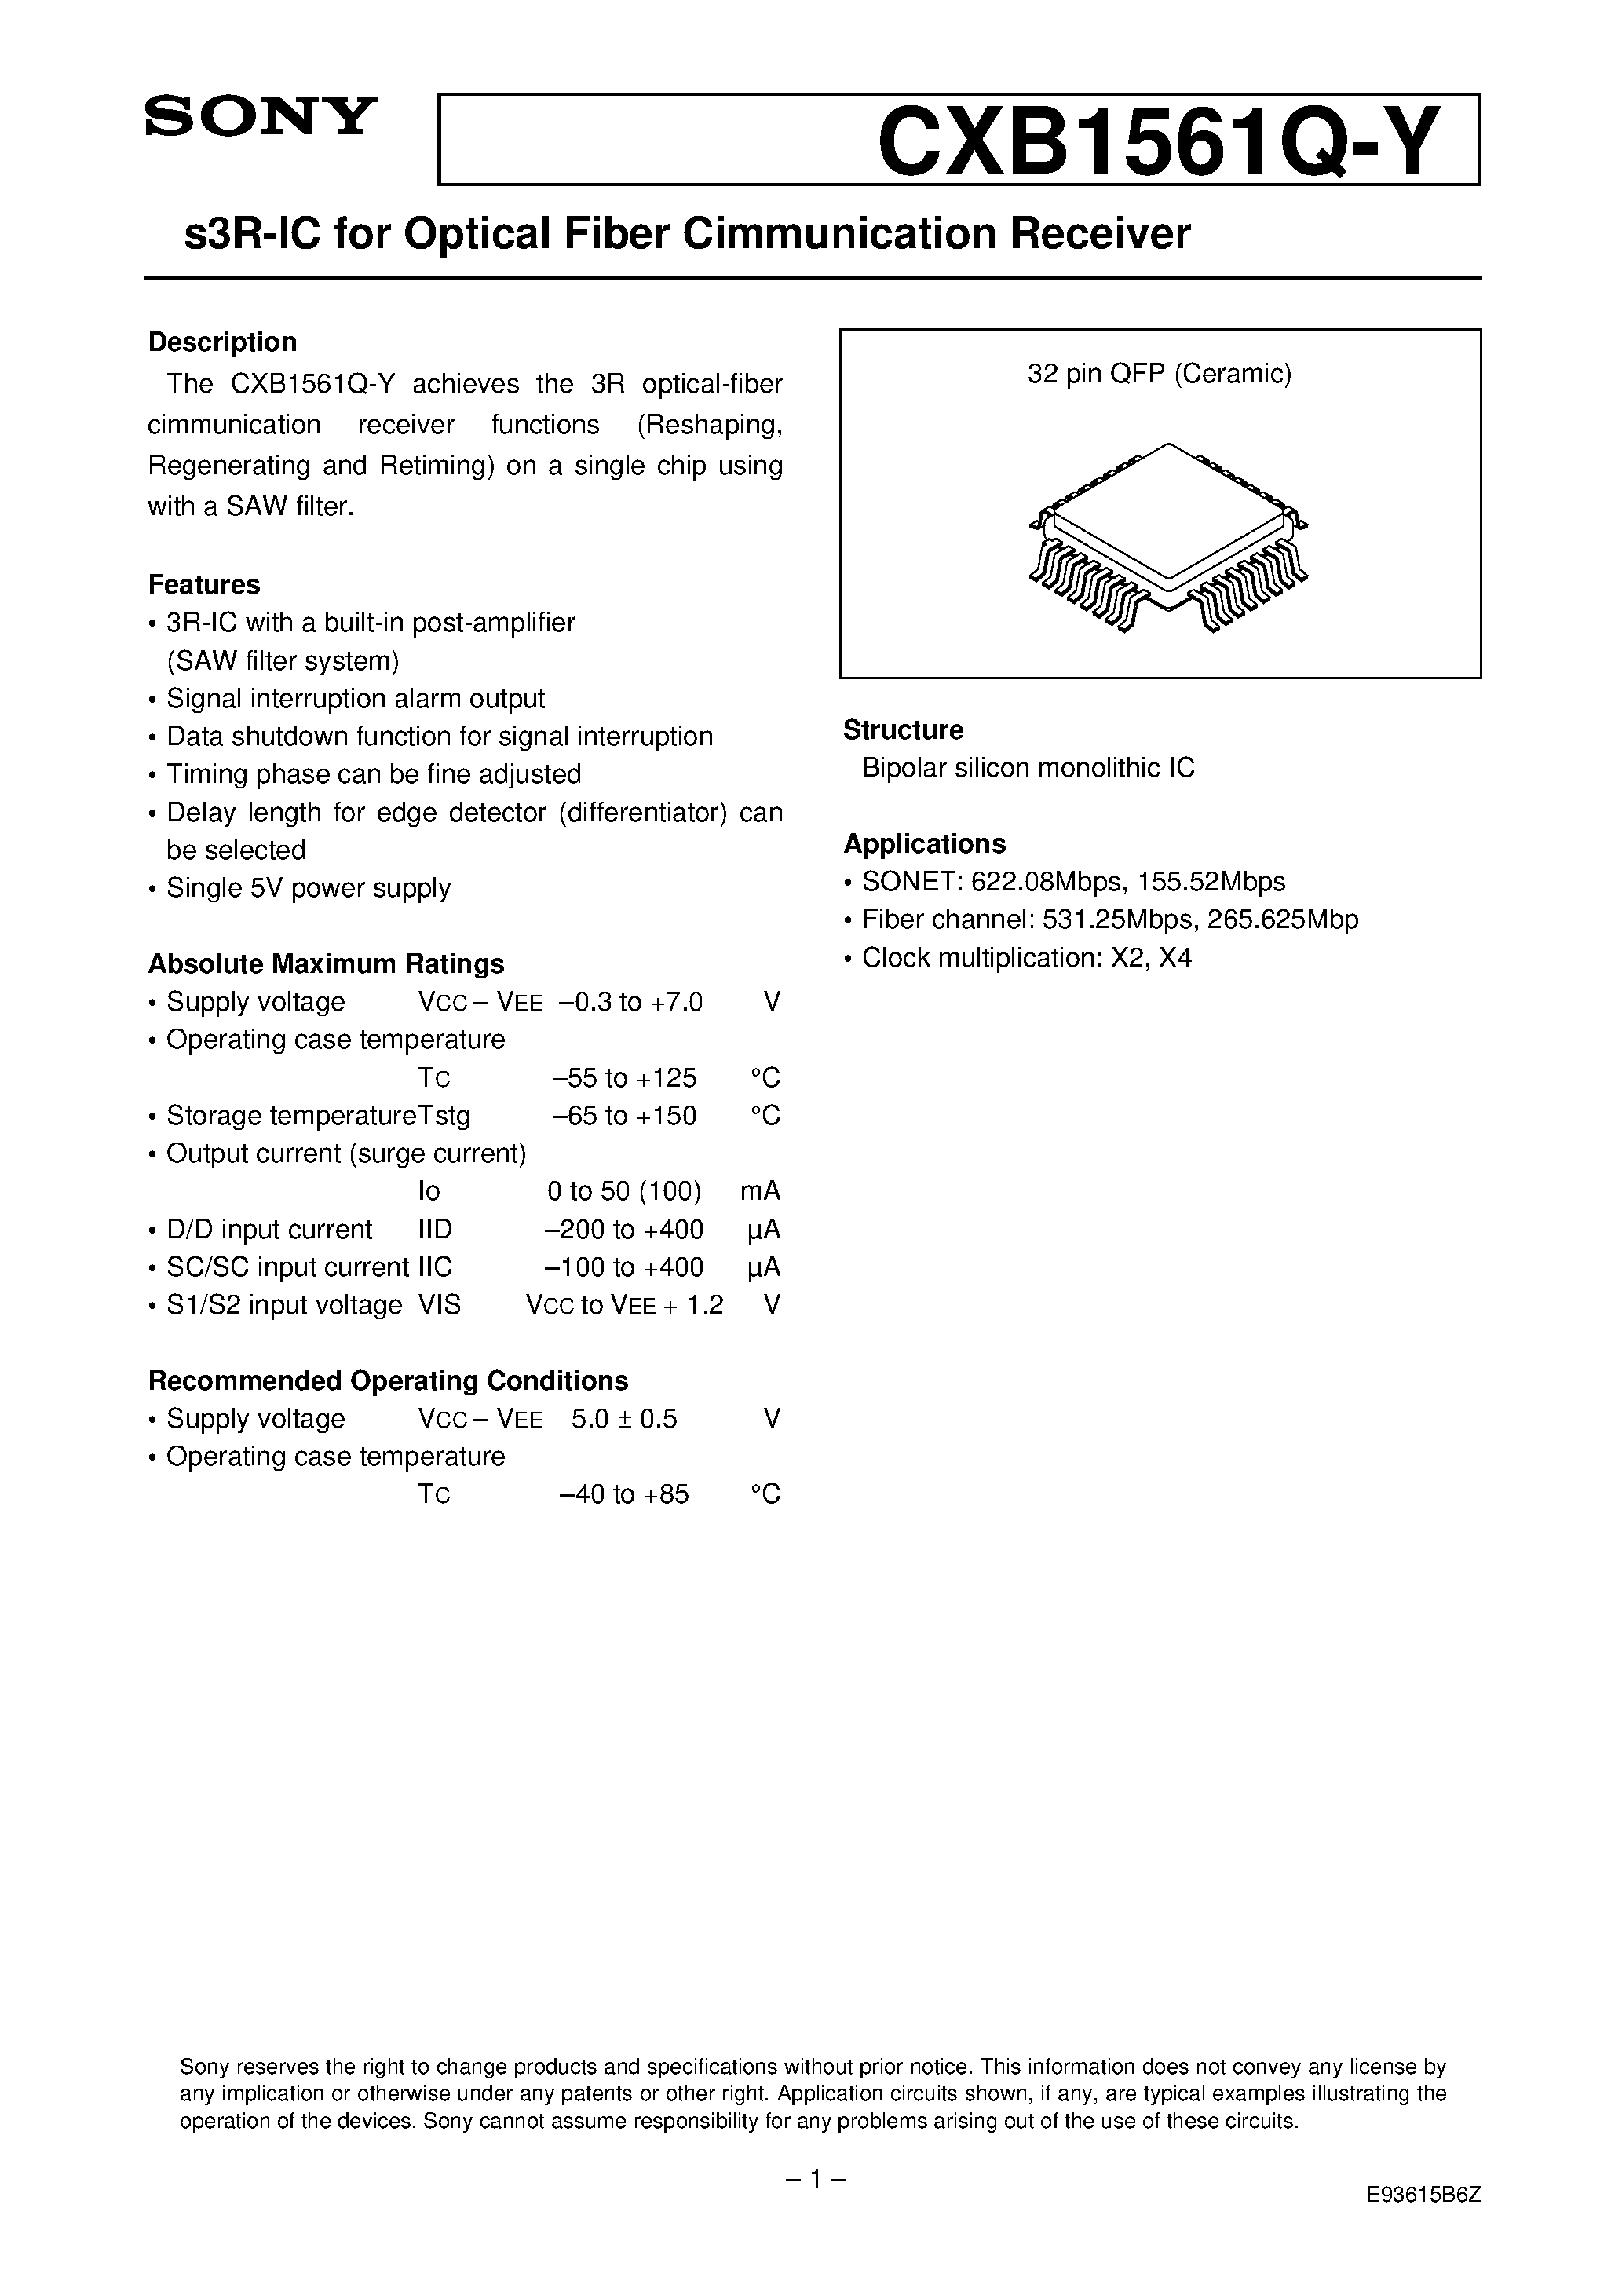 Datasheet CXB1561Q-Y - s3R-IC for Optical Fiber Cimmunication Receiver page 1